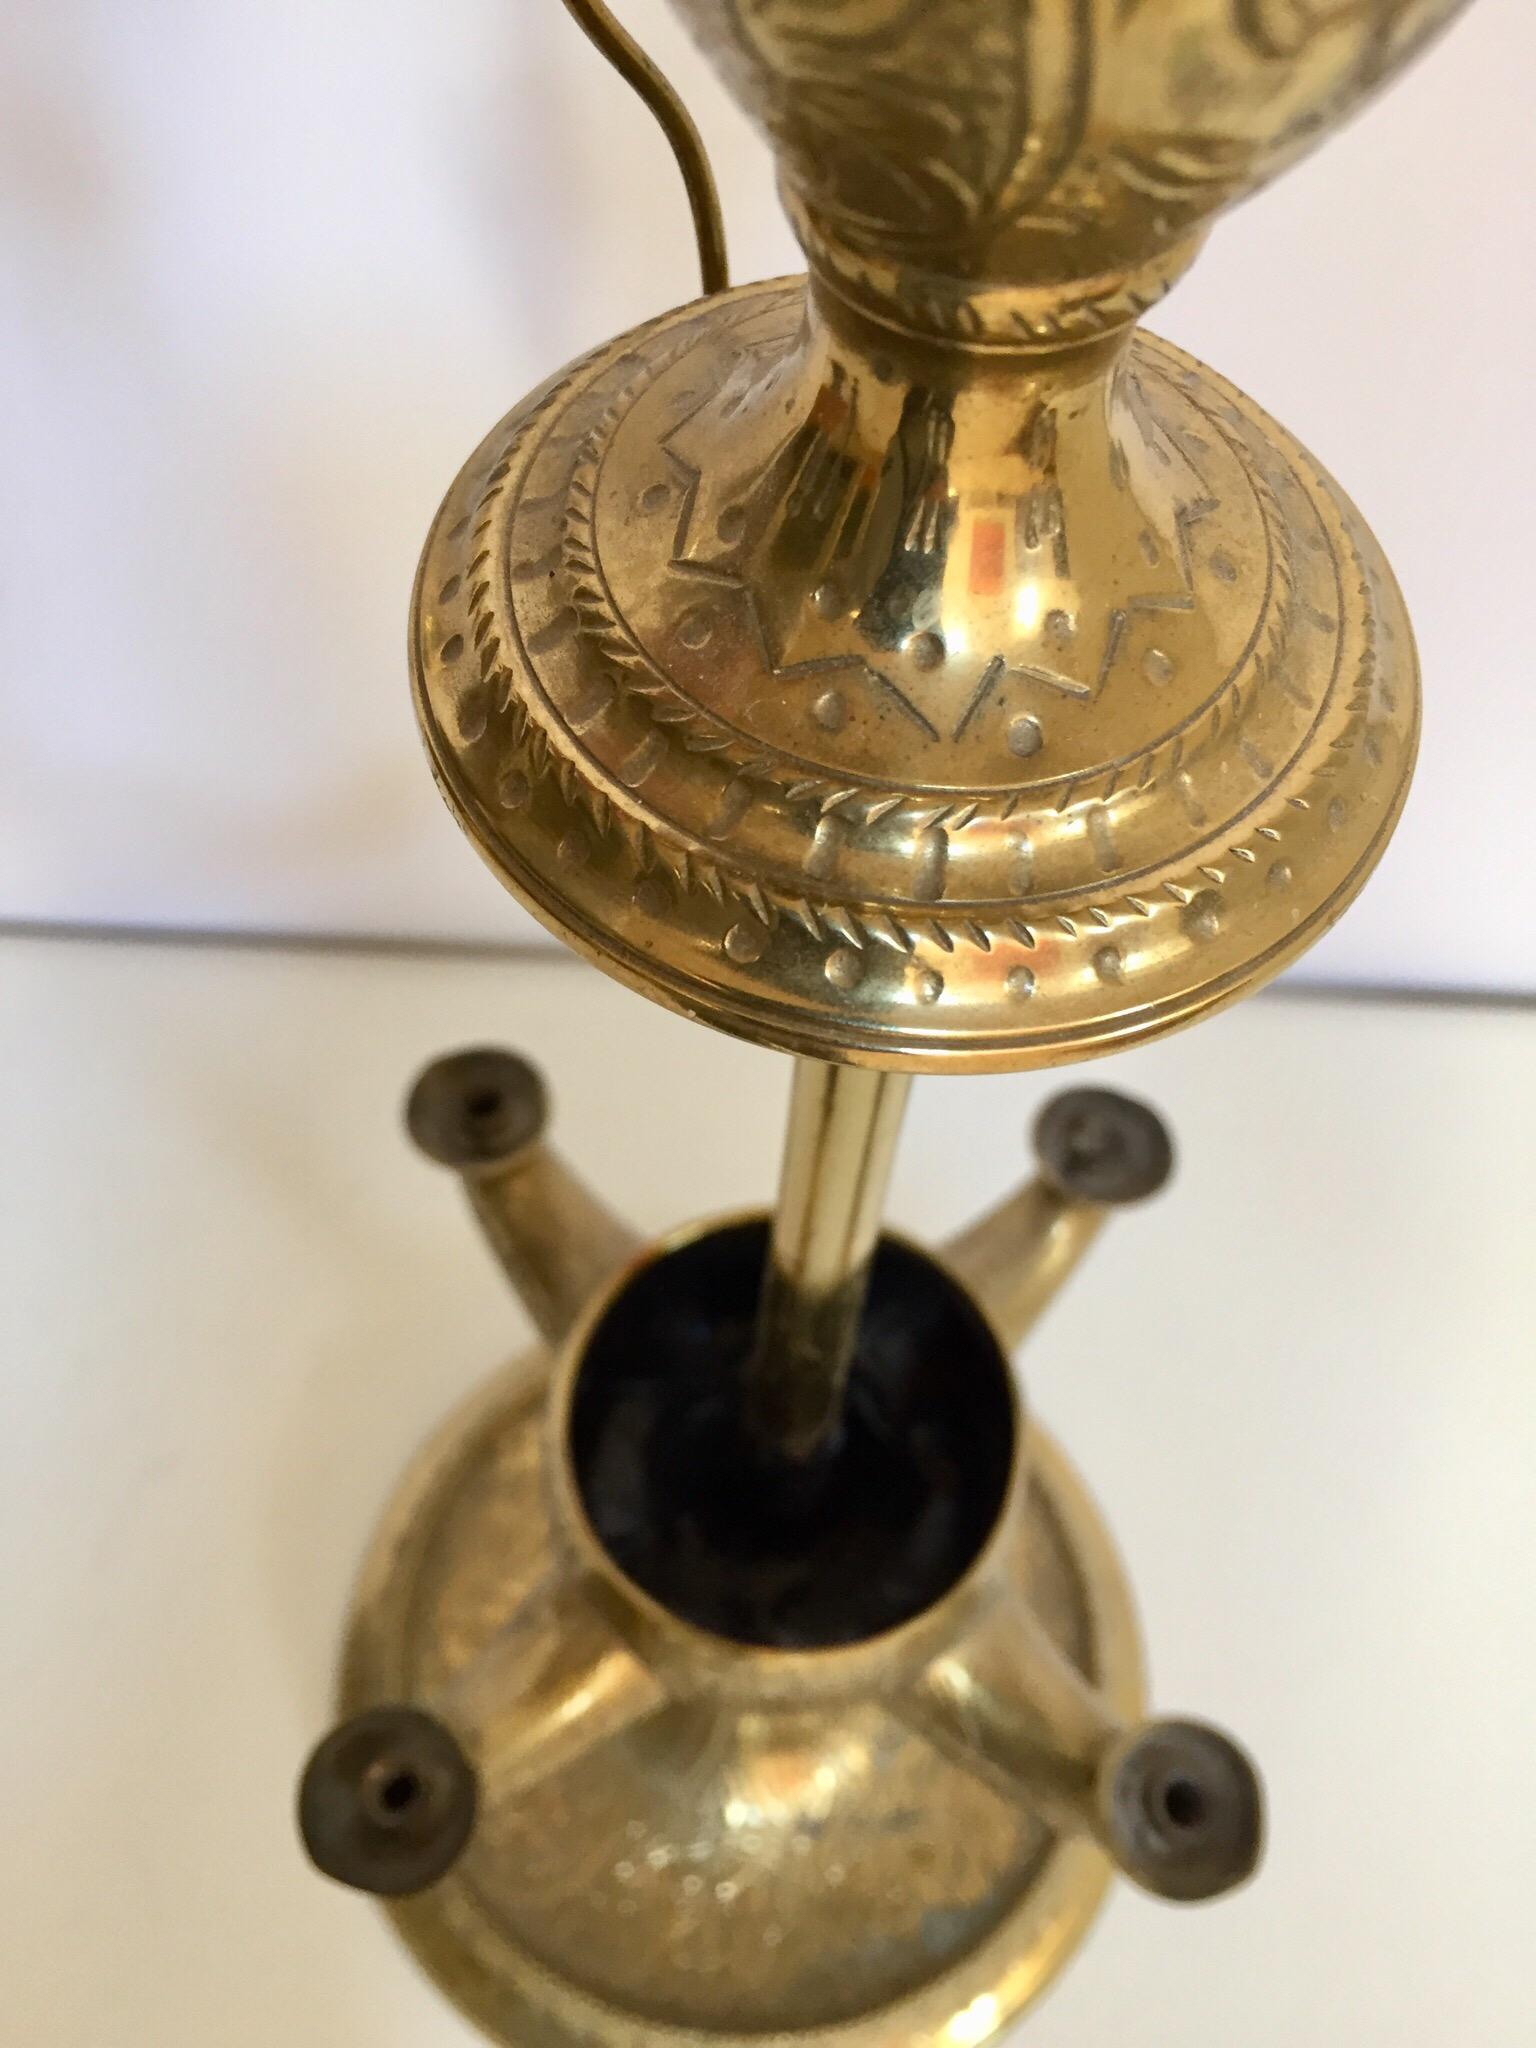 Anglo Raj antique, early 20th century brass Indian temple oil lamp.
Whale oil lamp with 4 wick burners.
Fantastic patina and great scale.
Used for sacred ceremonies in temples or at home.
The brass base is heavily carved with intricate floral